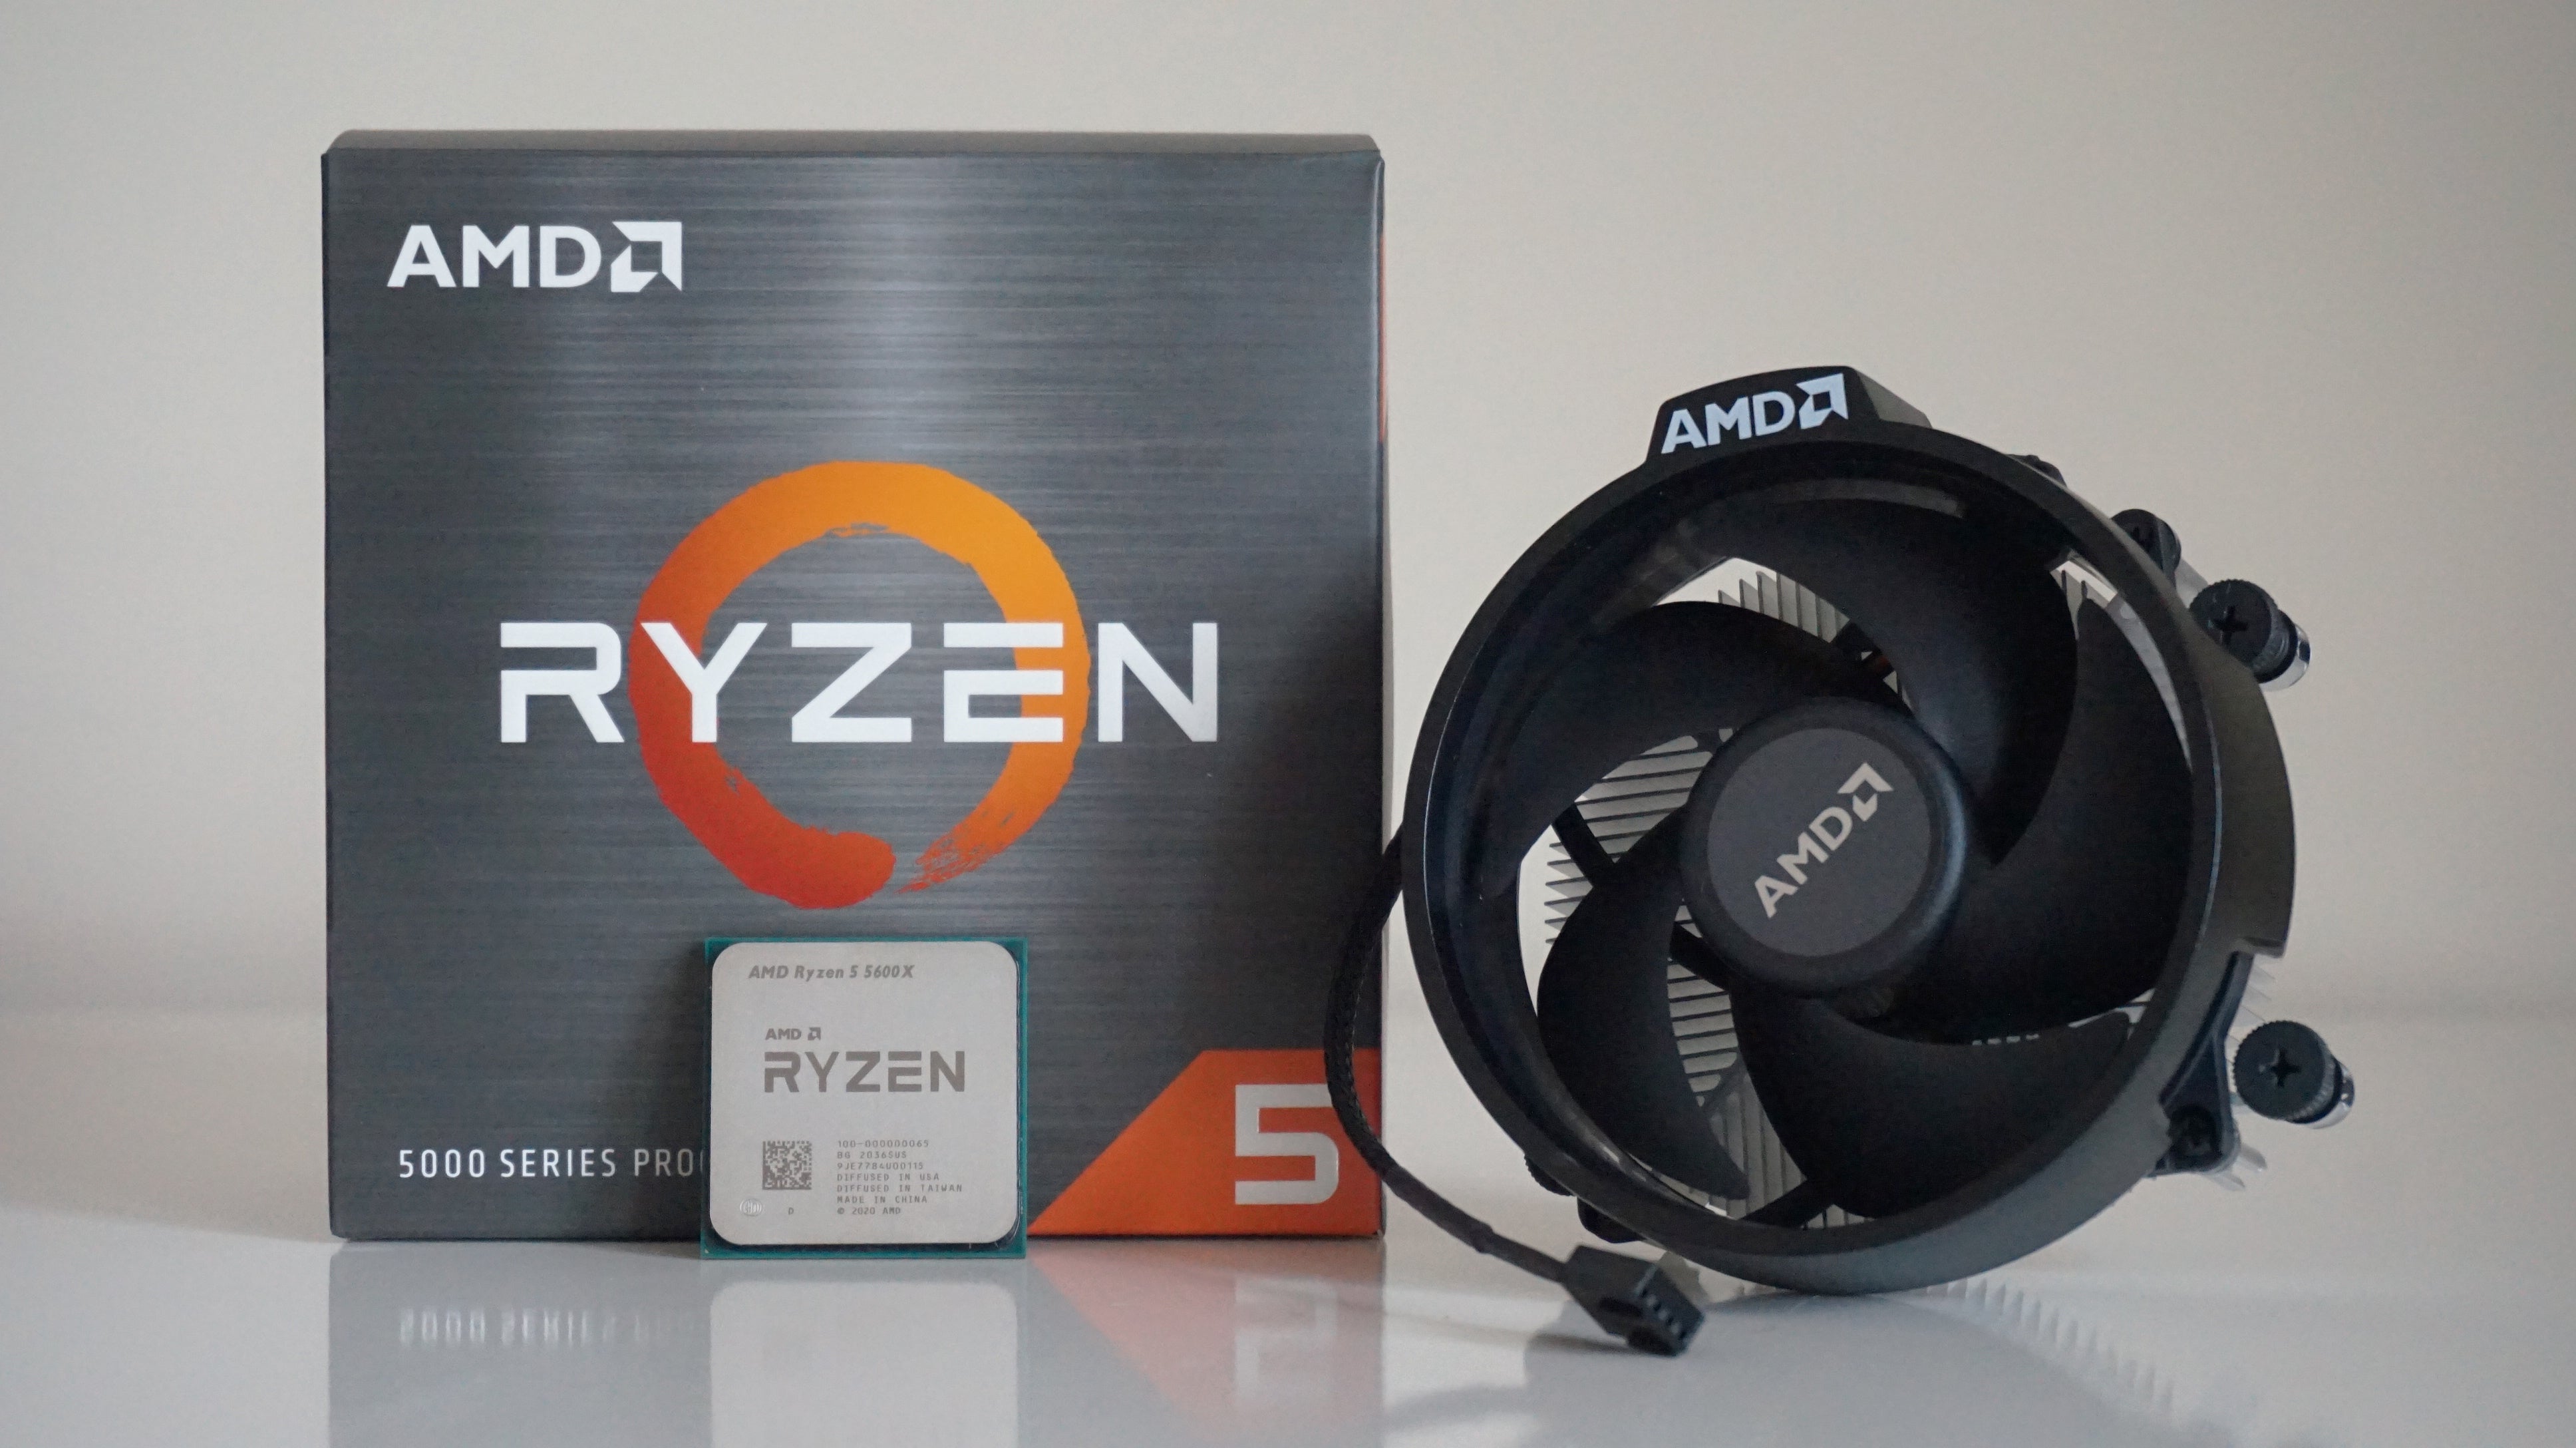 The Ryzen 5600 is much better value than the 5600X - especially 